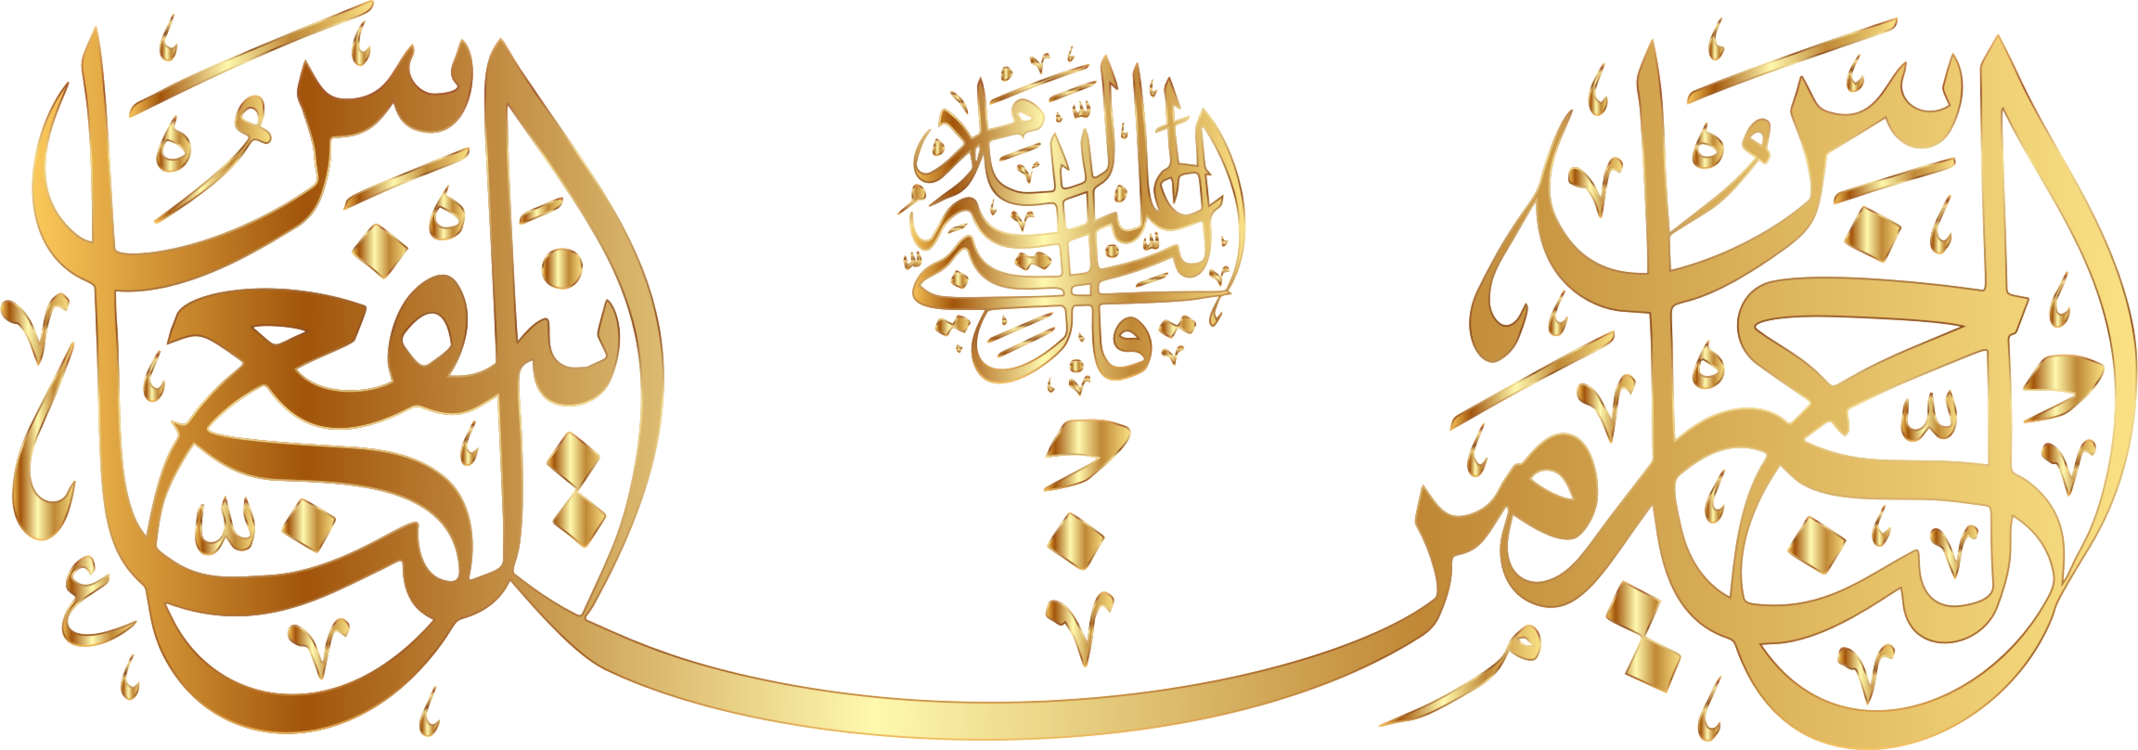 The Quran Calligraphy